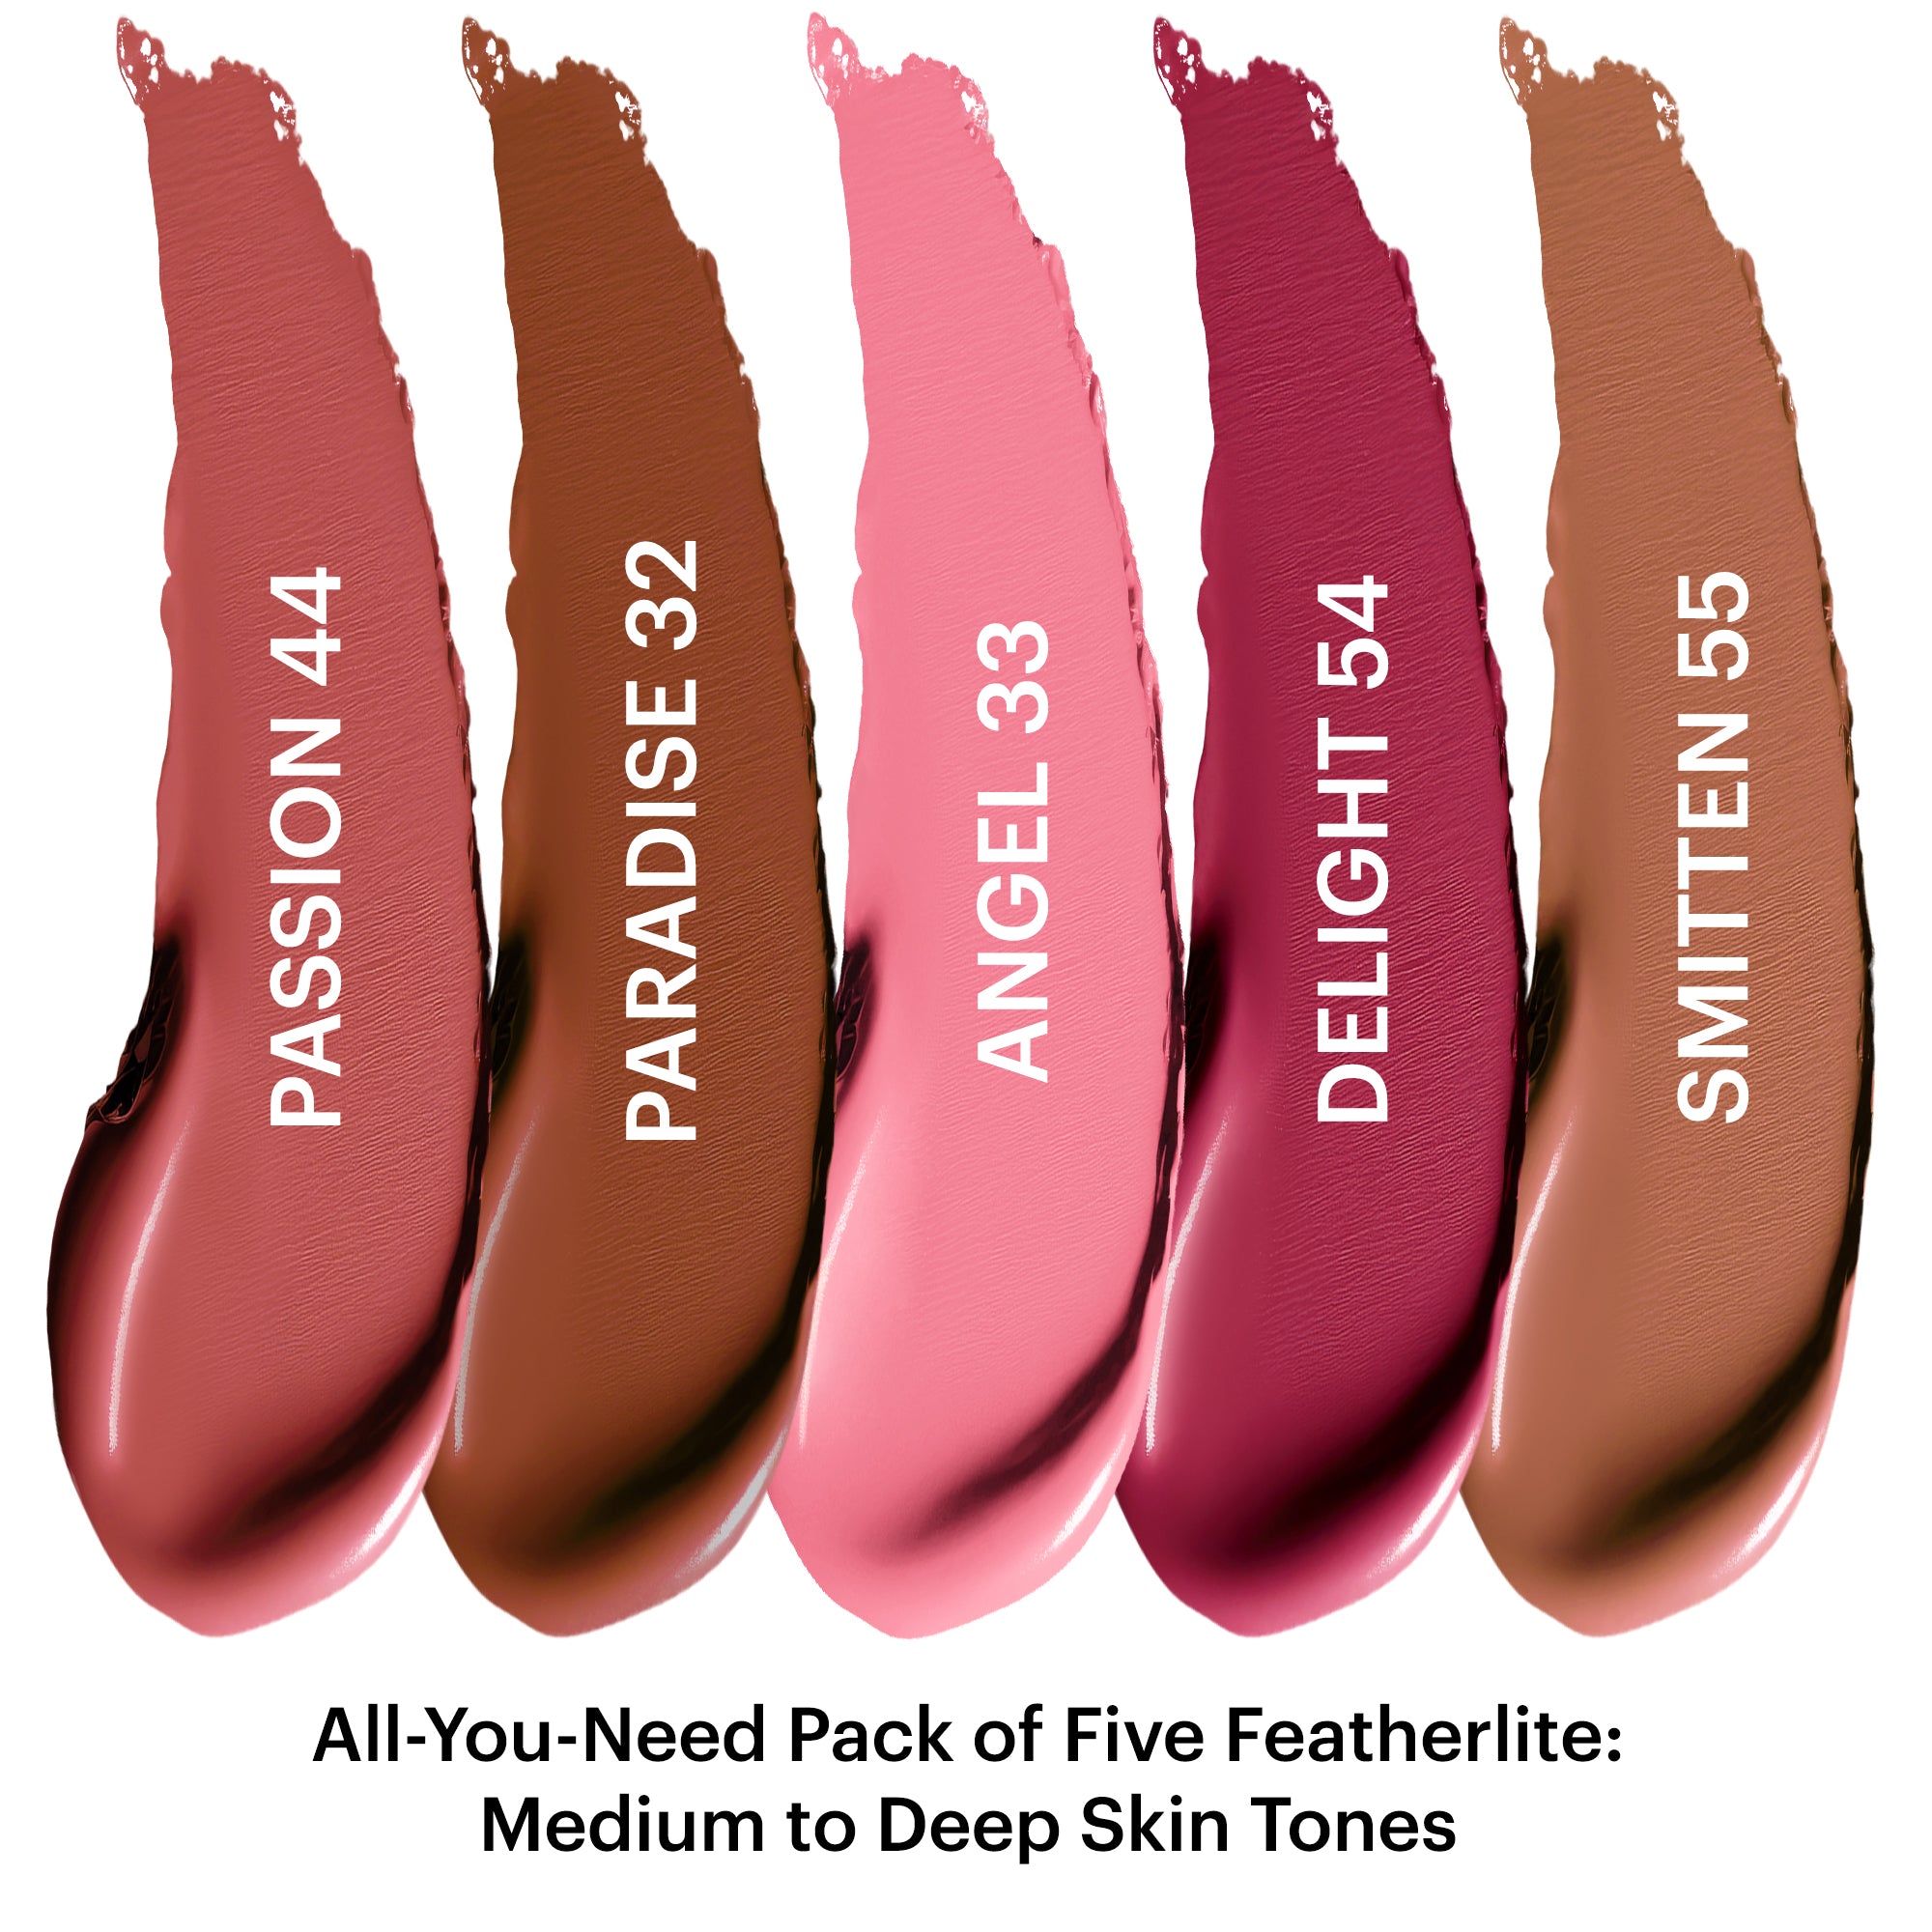 All-You-Need Pack-of-Five Featherlites: Medium to Deep Skin Tones